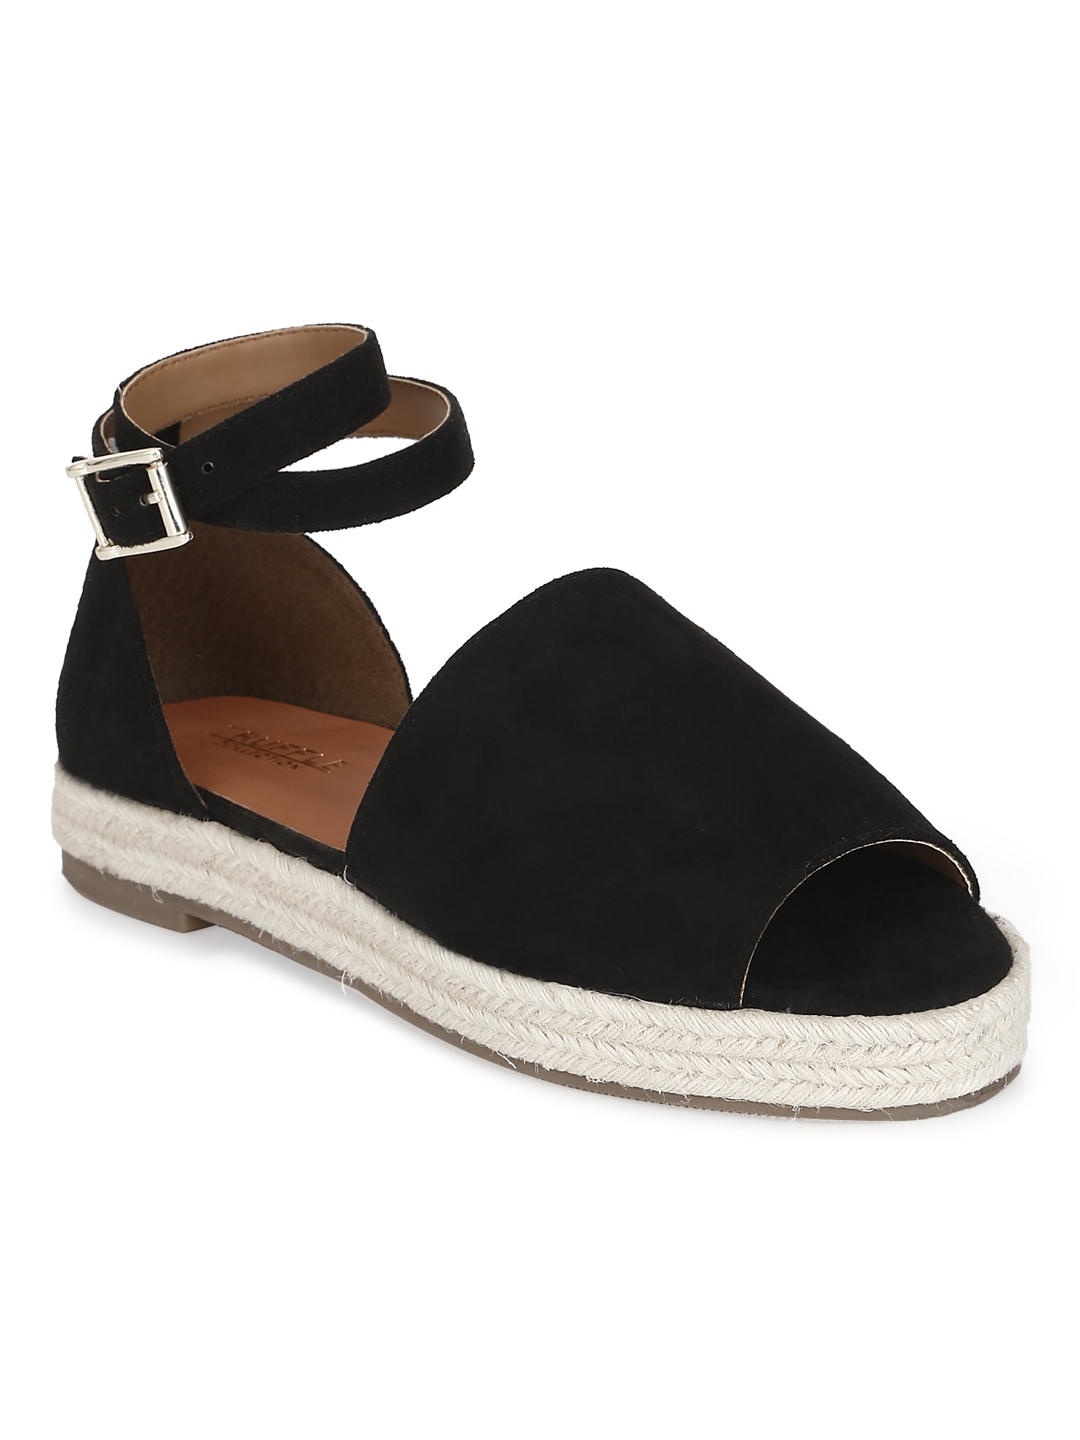 Truffle Collection | Black Sandals